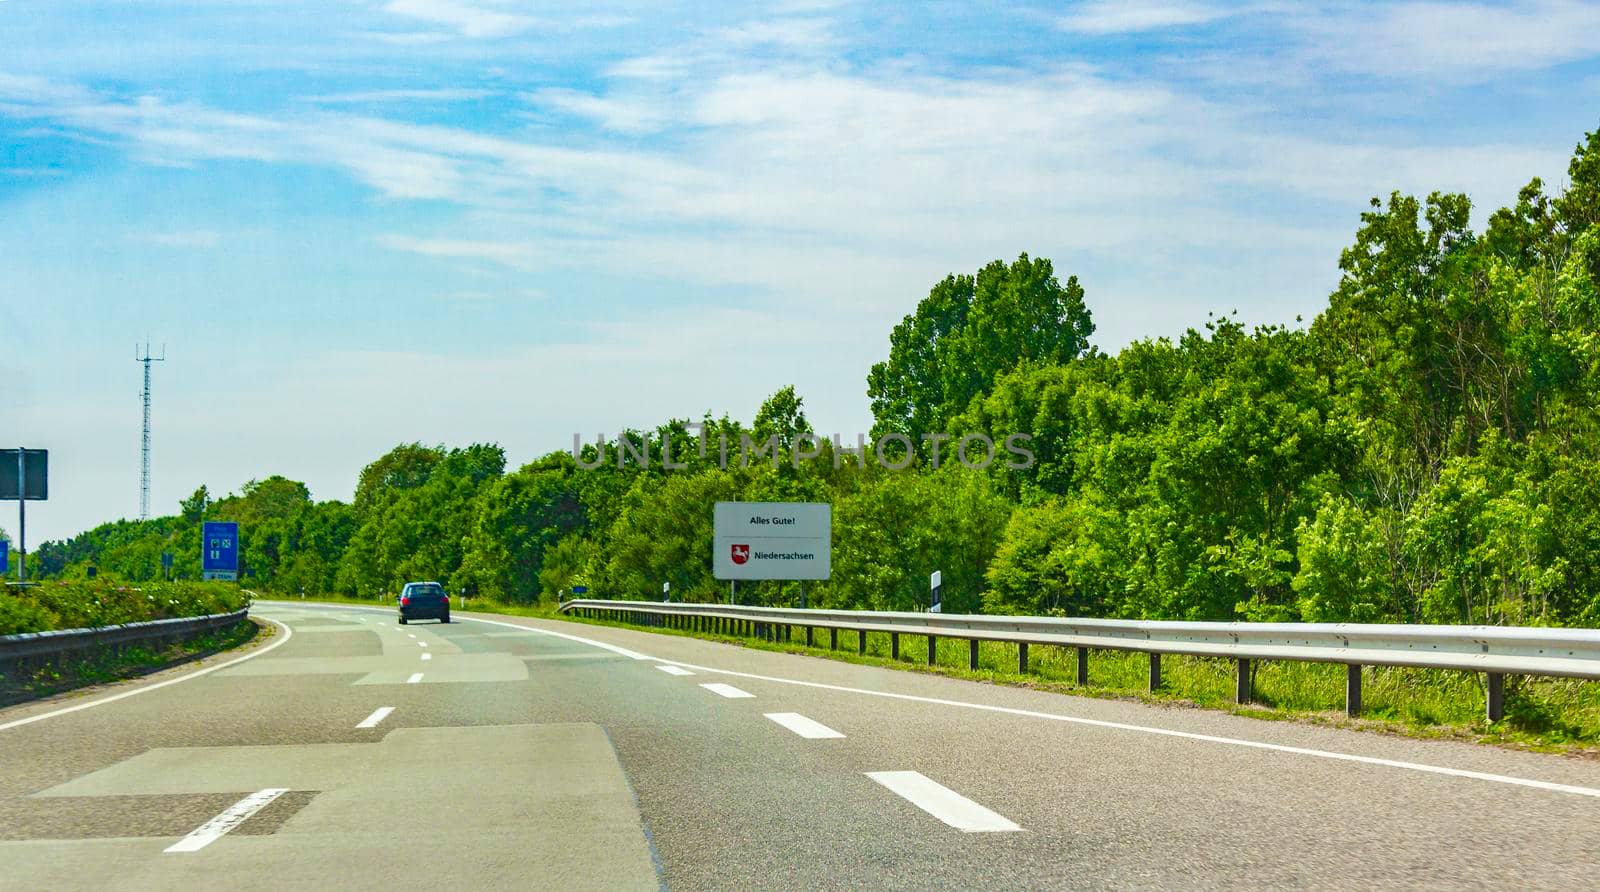 Driving on the German highway from Germany to Netherlands. by Arkadij